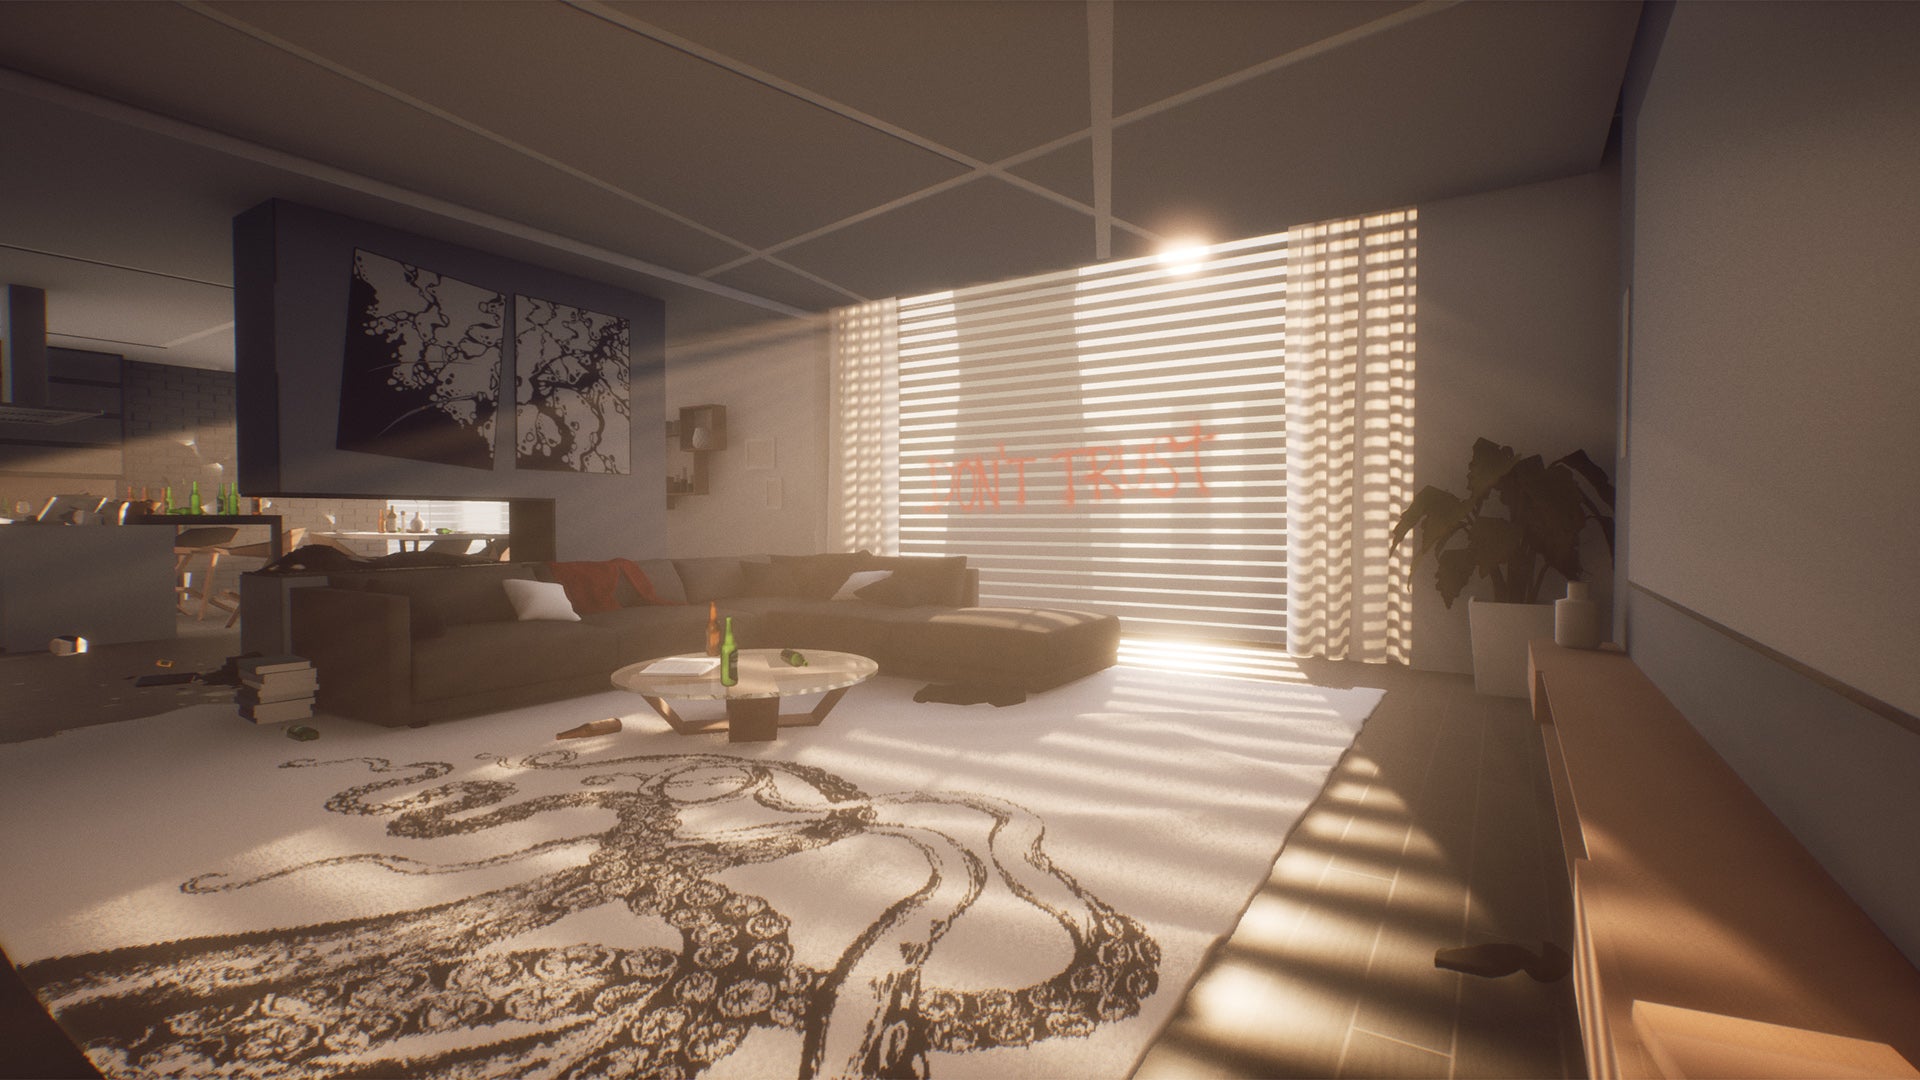 The living area of a stylish apartment, with the sun busting through the blinds. There's writing on those blinds, telling the player not to trust people.